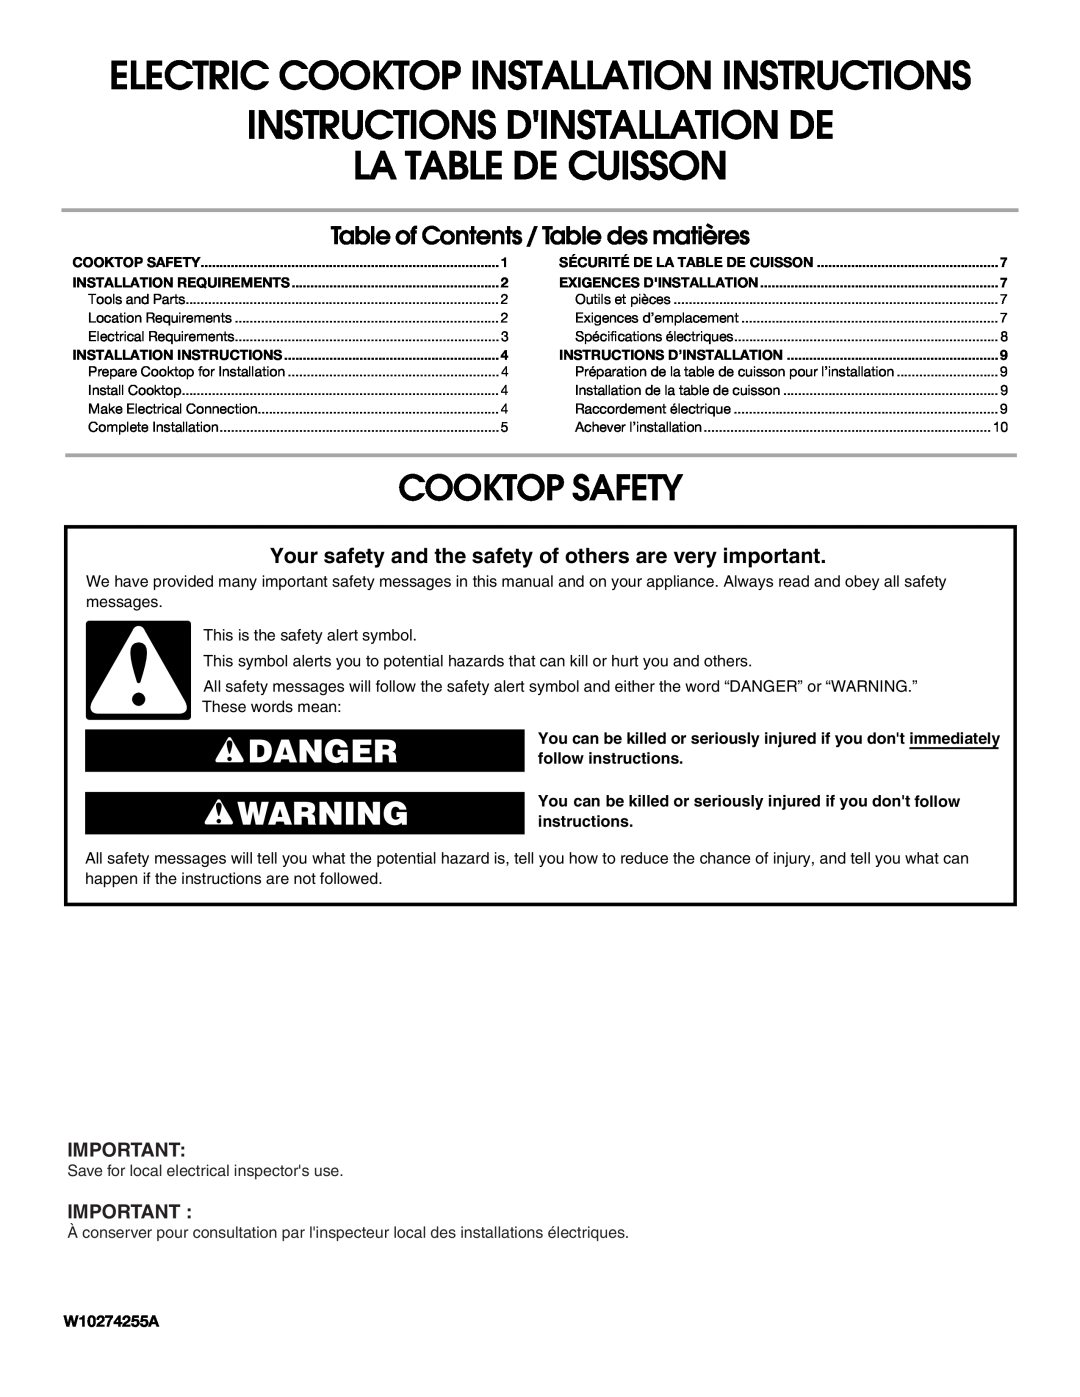 Maytag W10274255A installation instructions Cooktop Safety, Danger, Instructions Dinstallation De La Table De Cuisson 